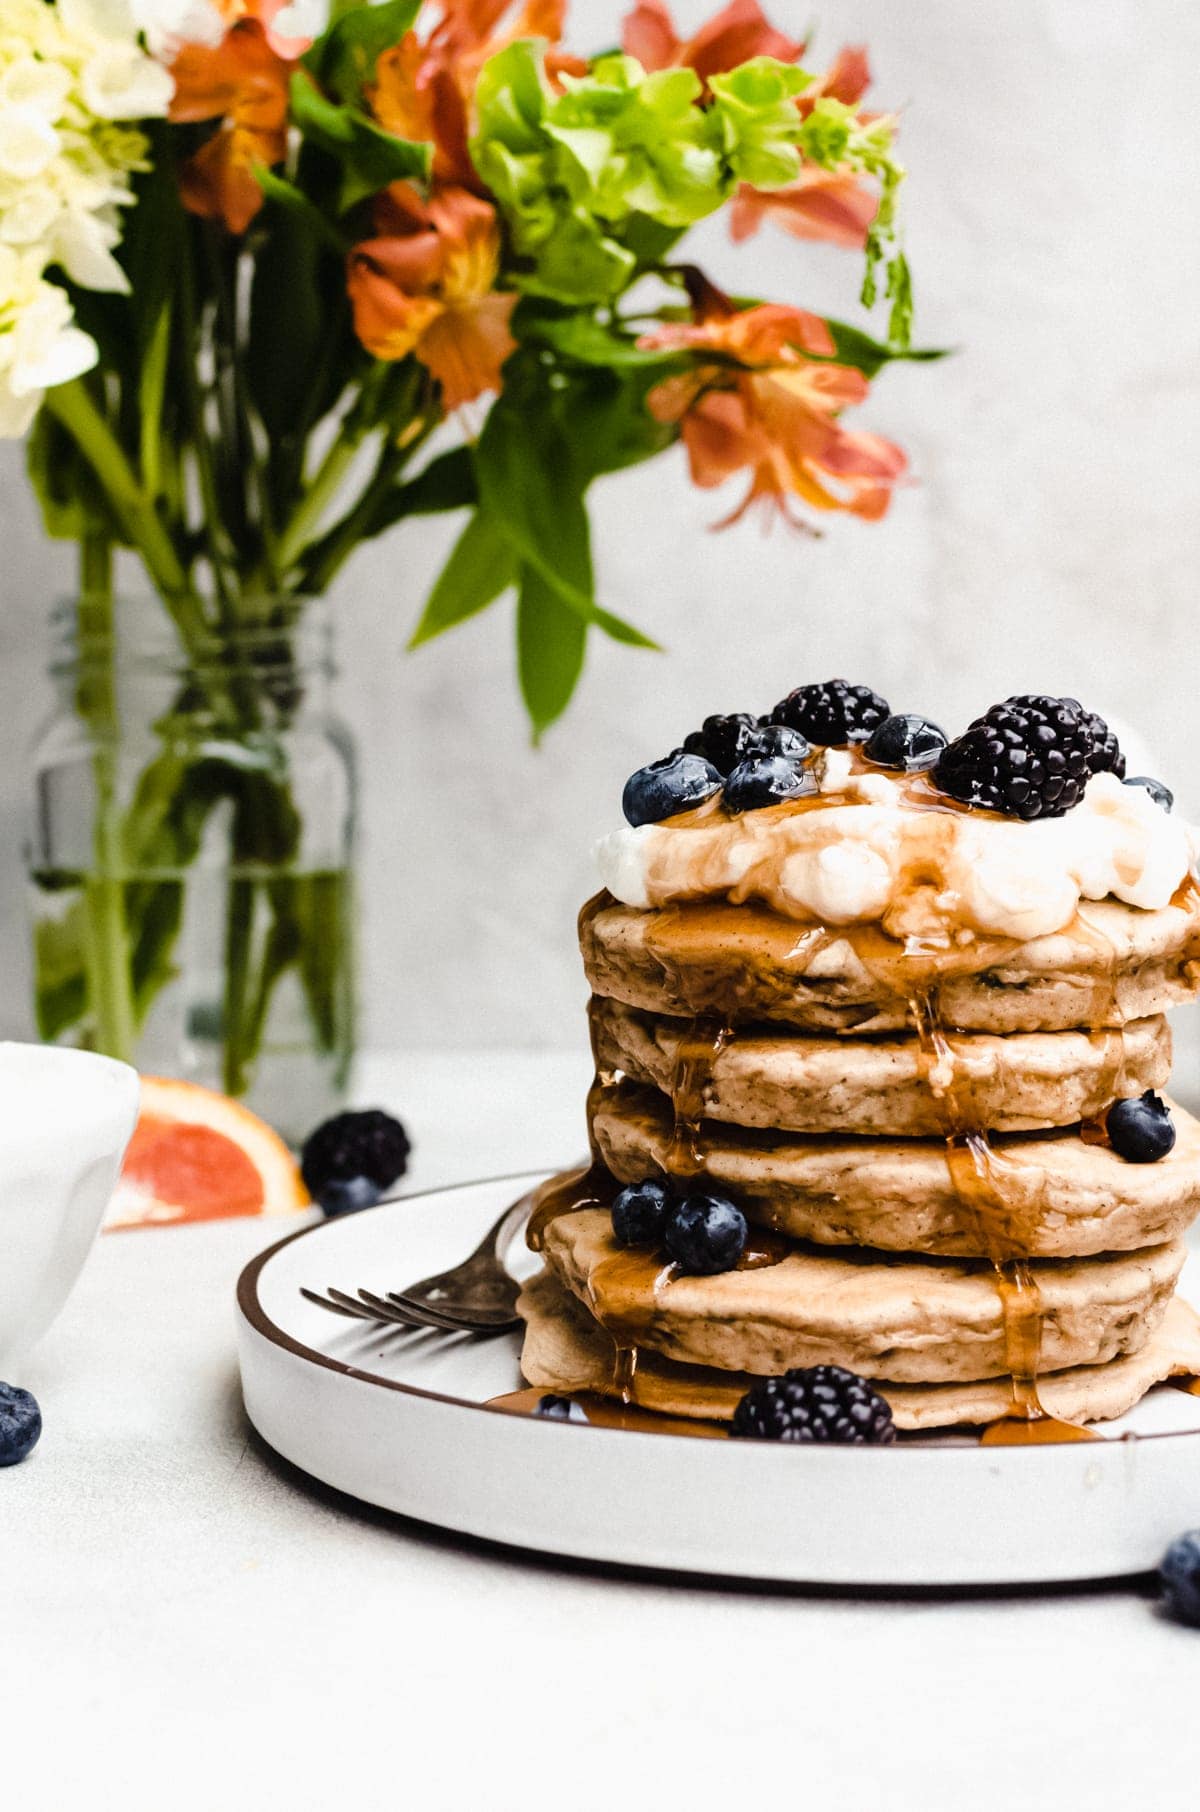 carrot cake pancakes smothered in whipped cream and maple syrup with berries